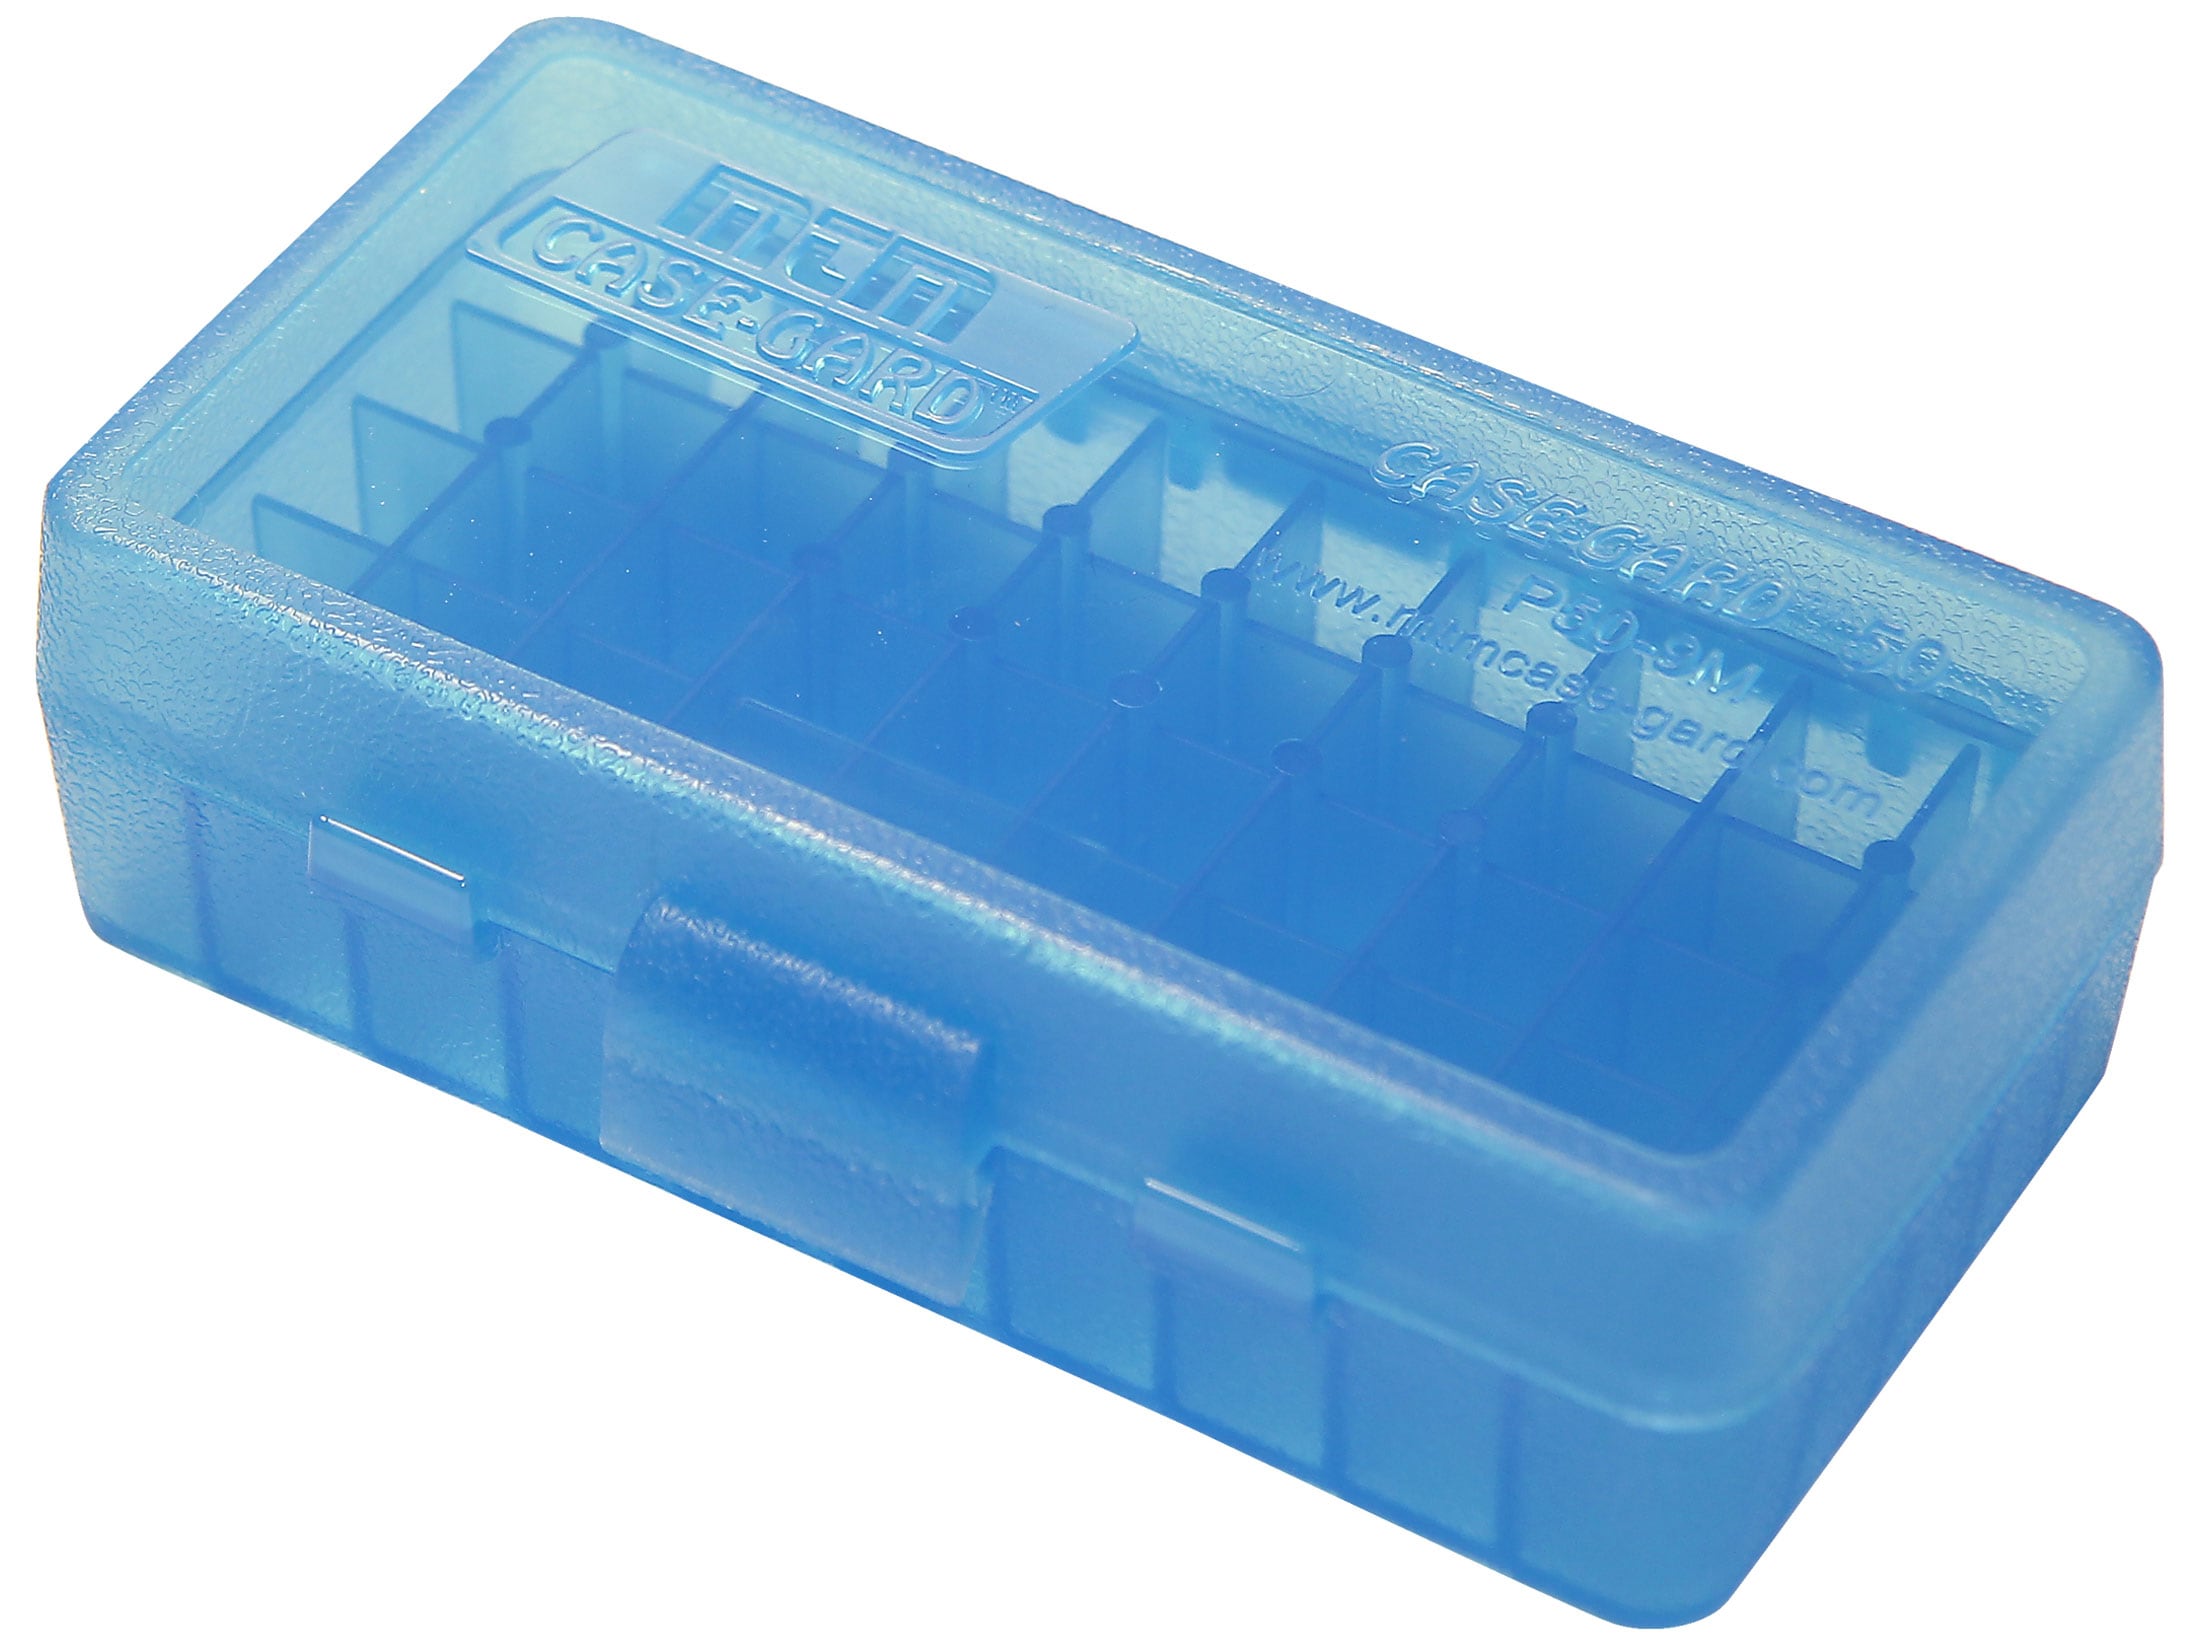 50 Round 9MM BERRY'S PLASTIC AMMO BOXES 380 FAST SHIPPING 10 SMOKE 